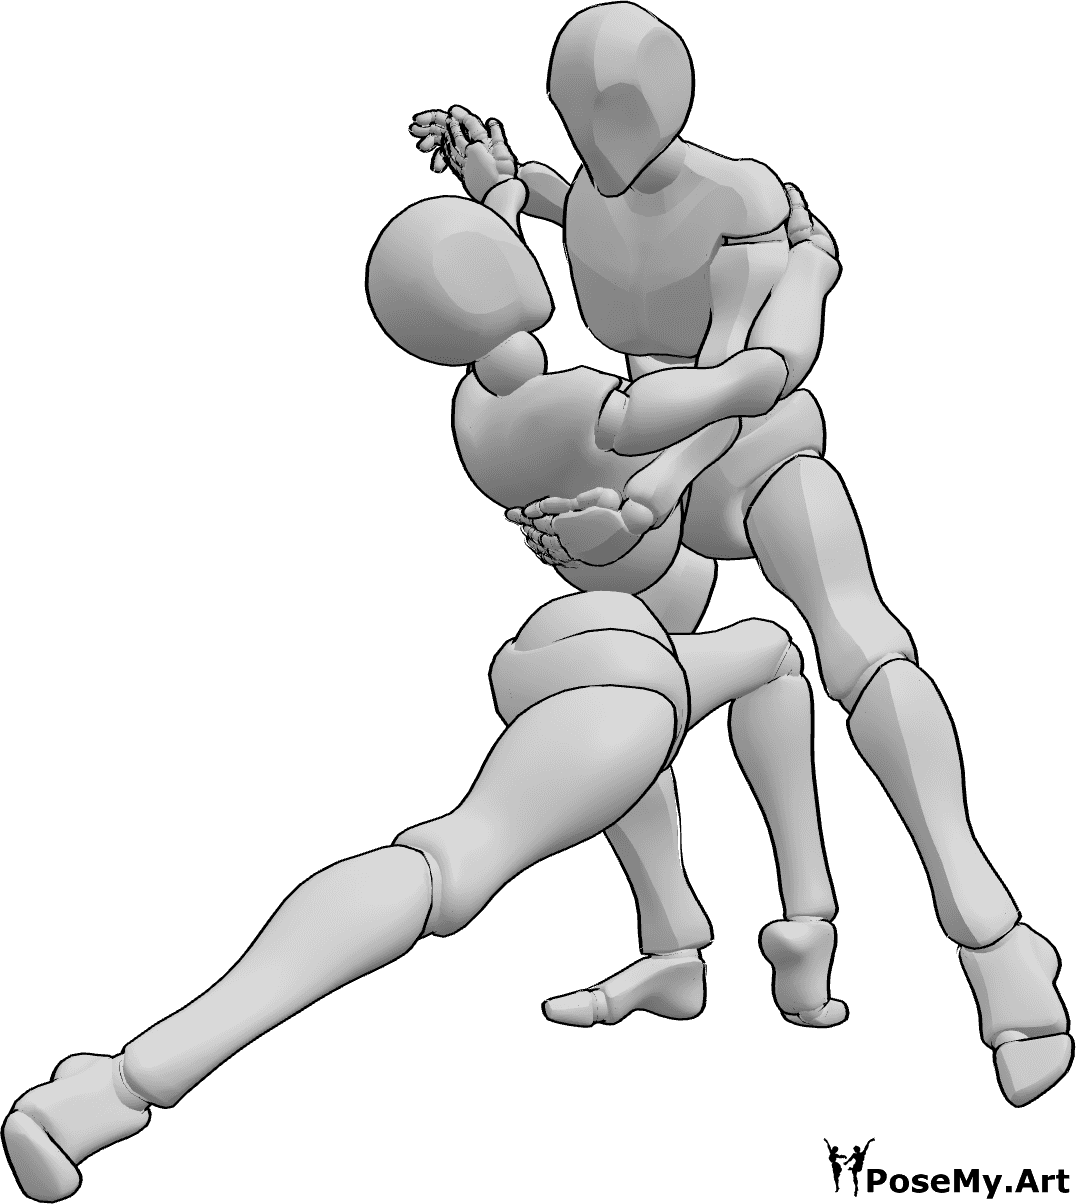 Pose Reference- Romantic tango dance pose - Female and male are dancing tango and looking into each other's eyes